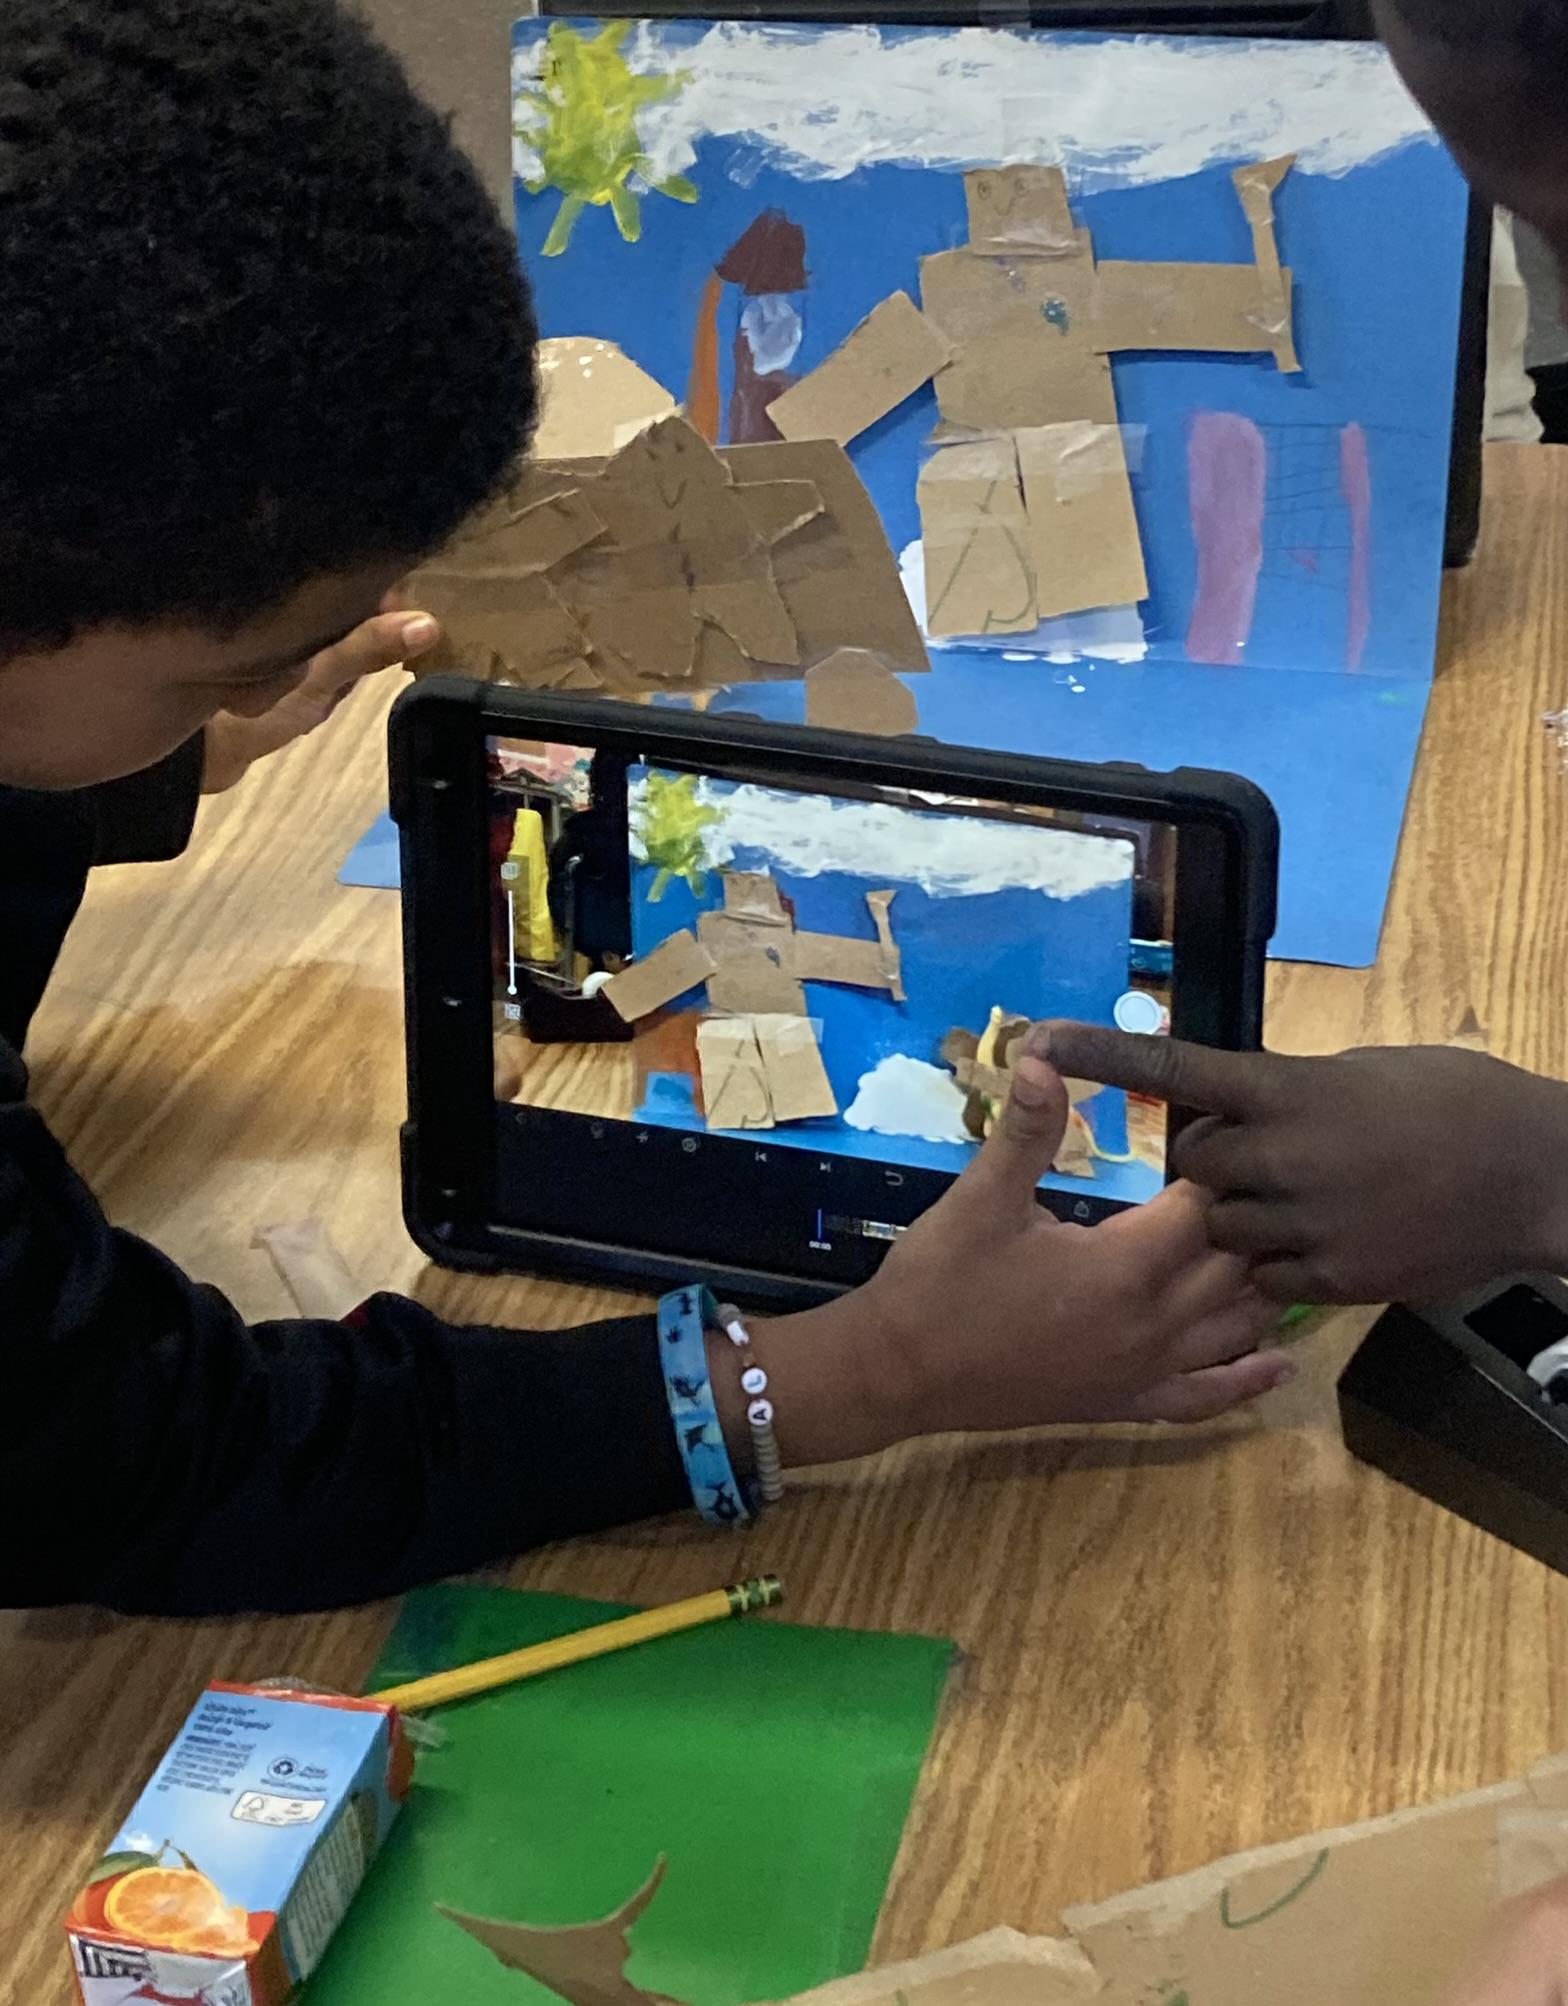 Two fourth grade students work together to film stop motion animation.